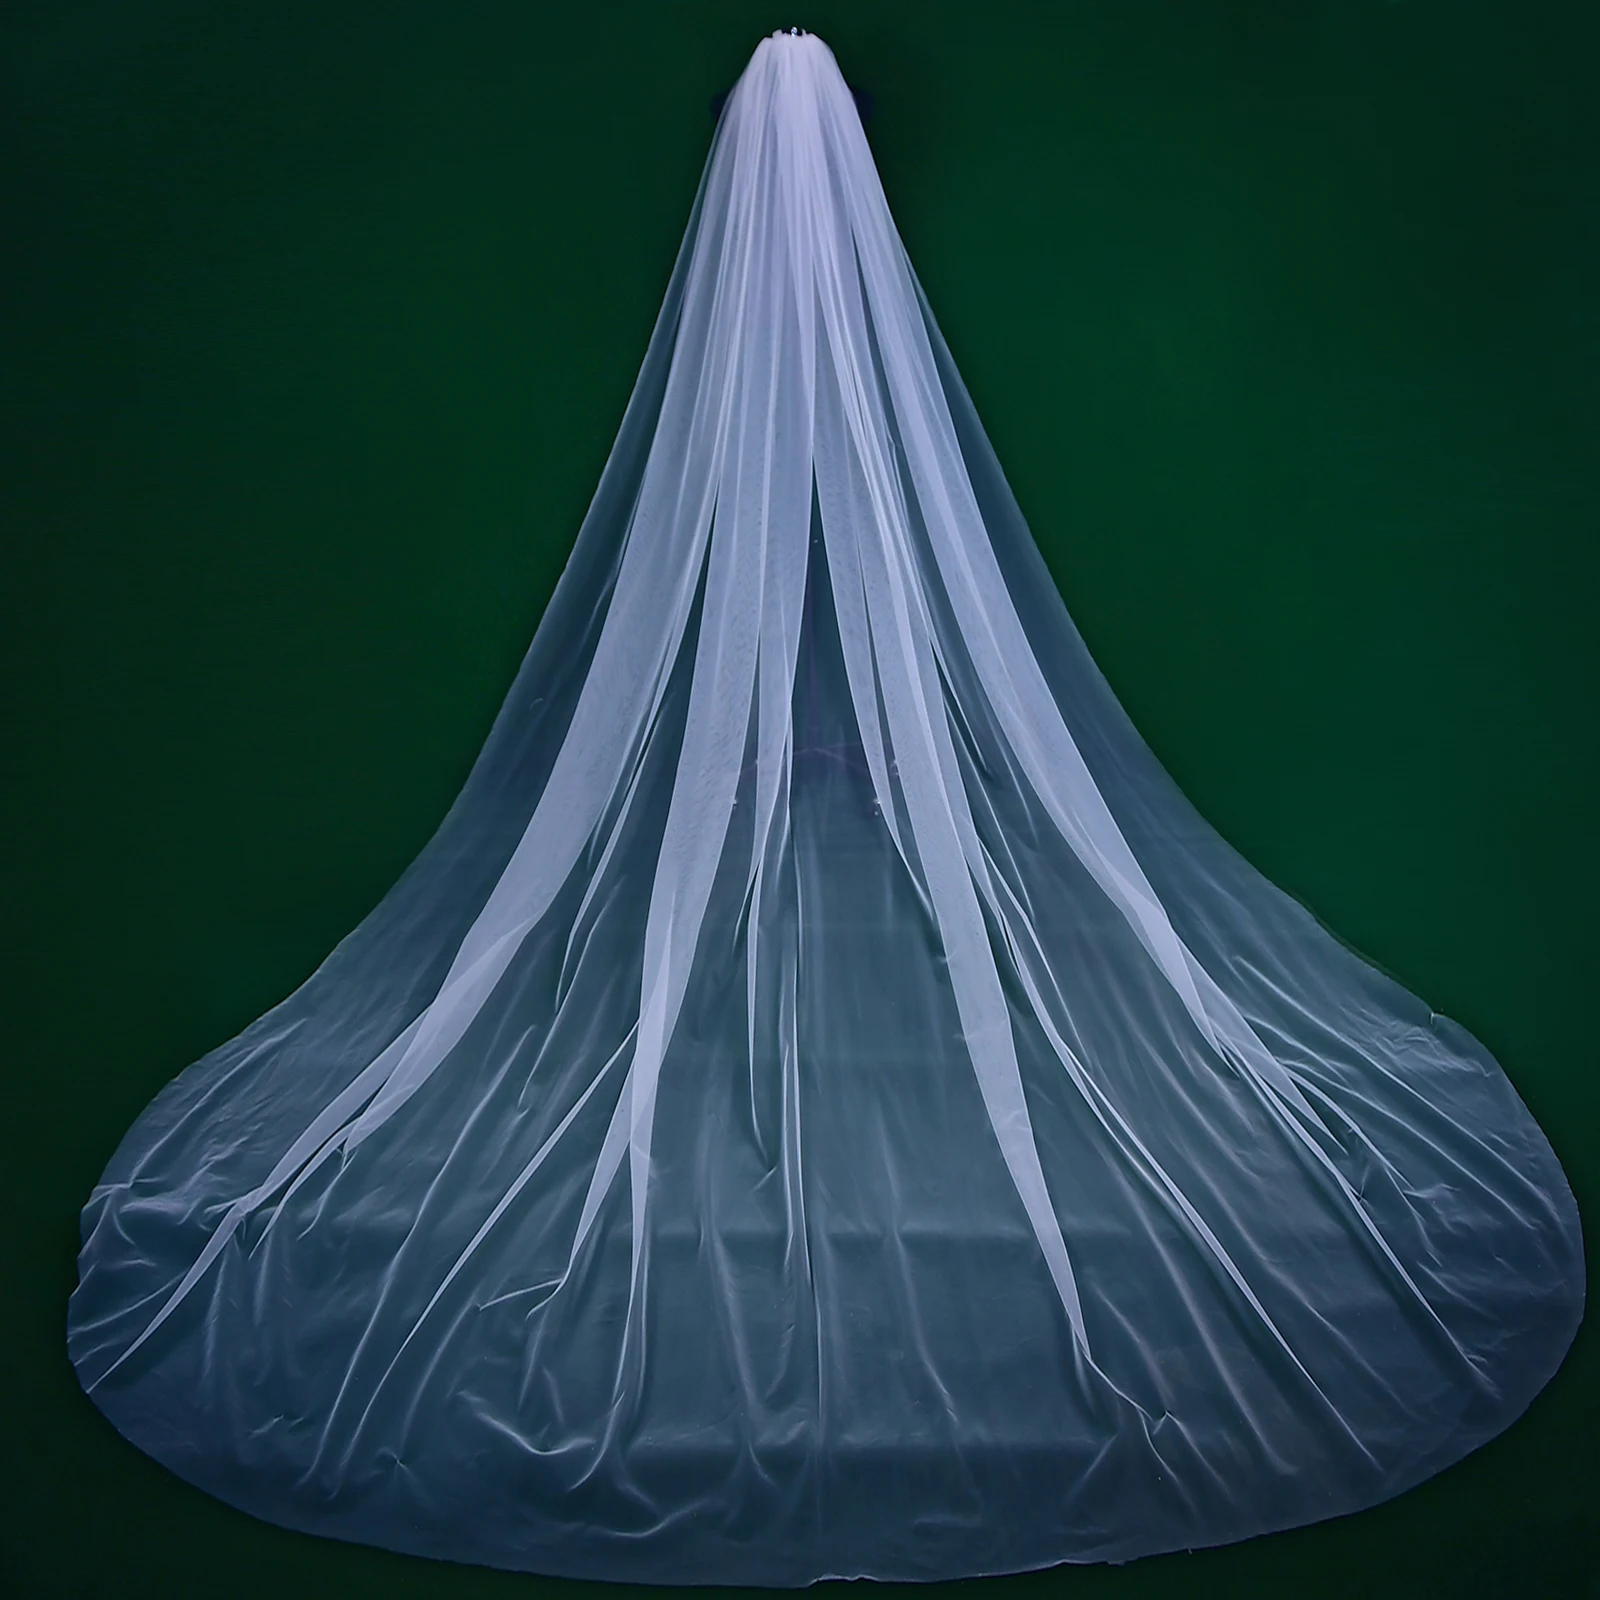 M92 Long Wedding Veil with Comb Plain Cathedral Bridal Veils 1 Tier Cut Edge Sheer Soft Tulle120in Wide Wedding Accessories